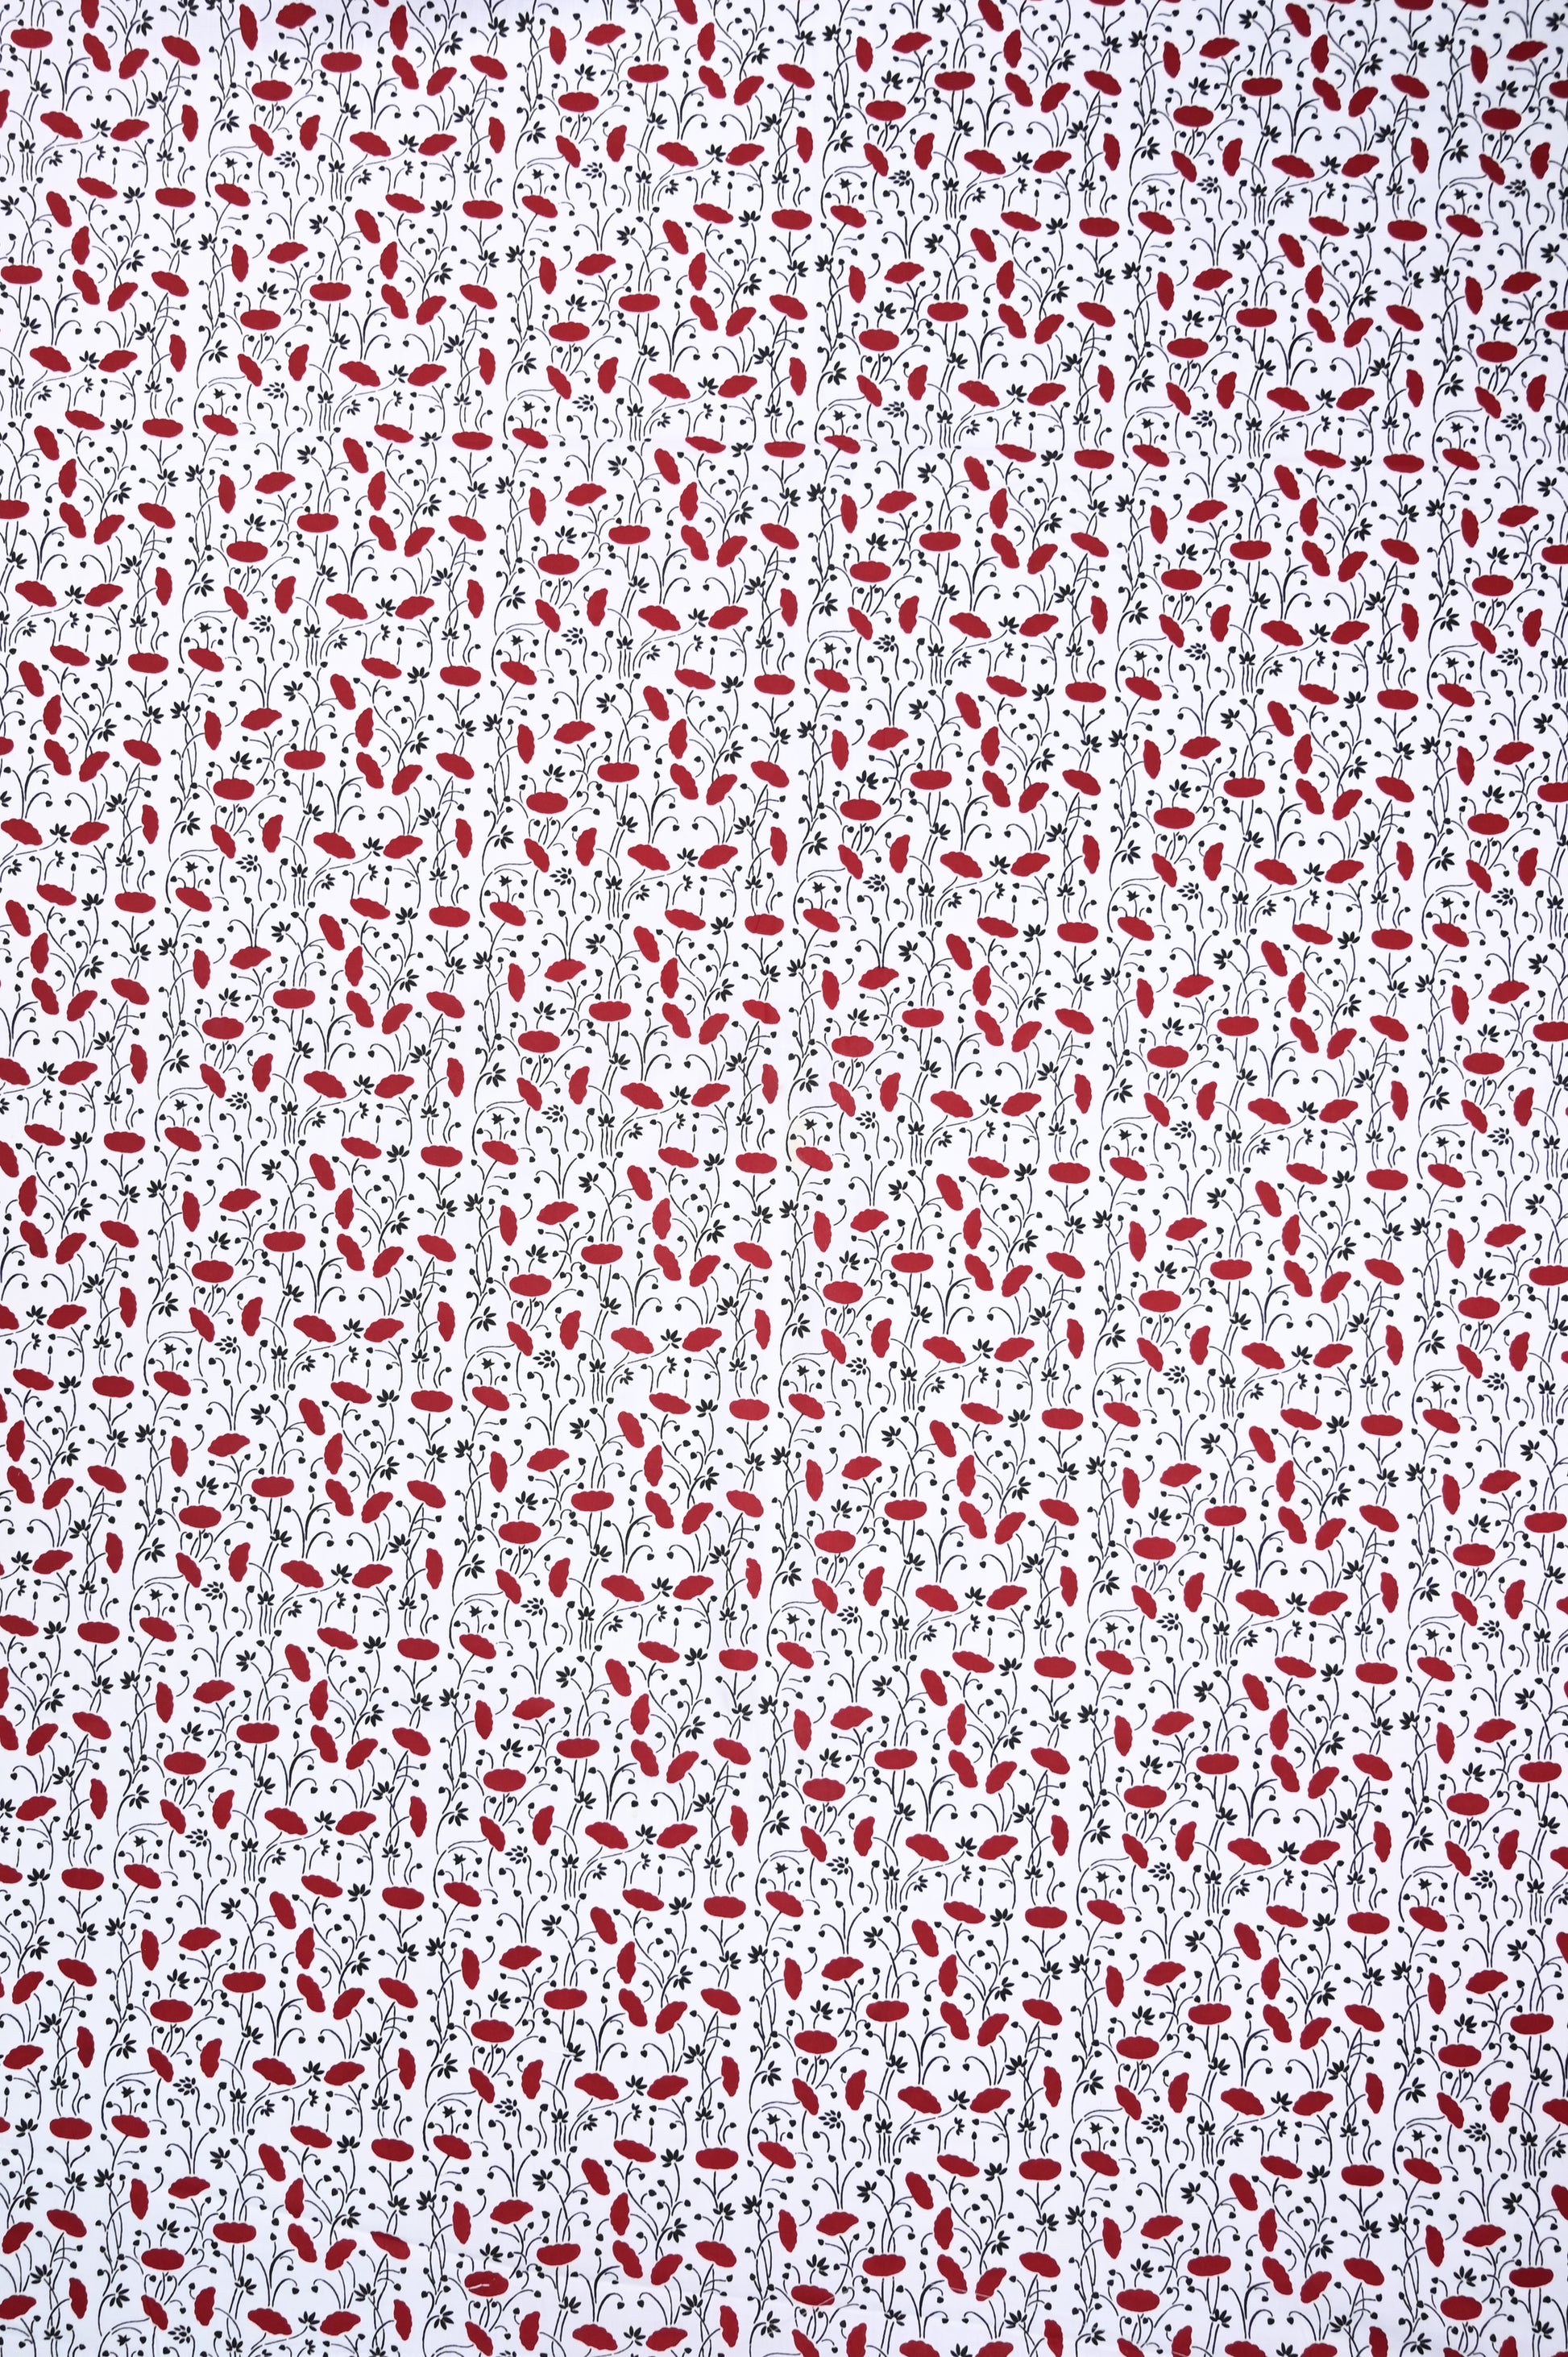 Cotton Printed Fabric with red floral design